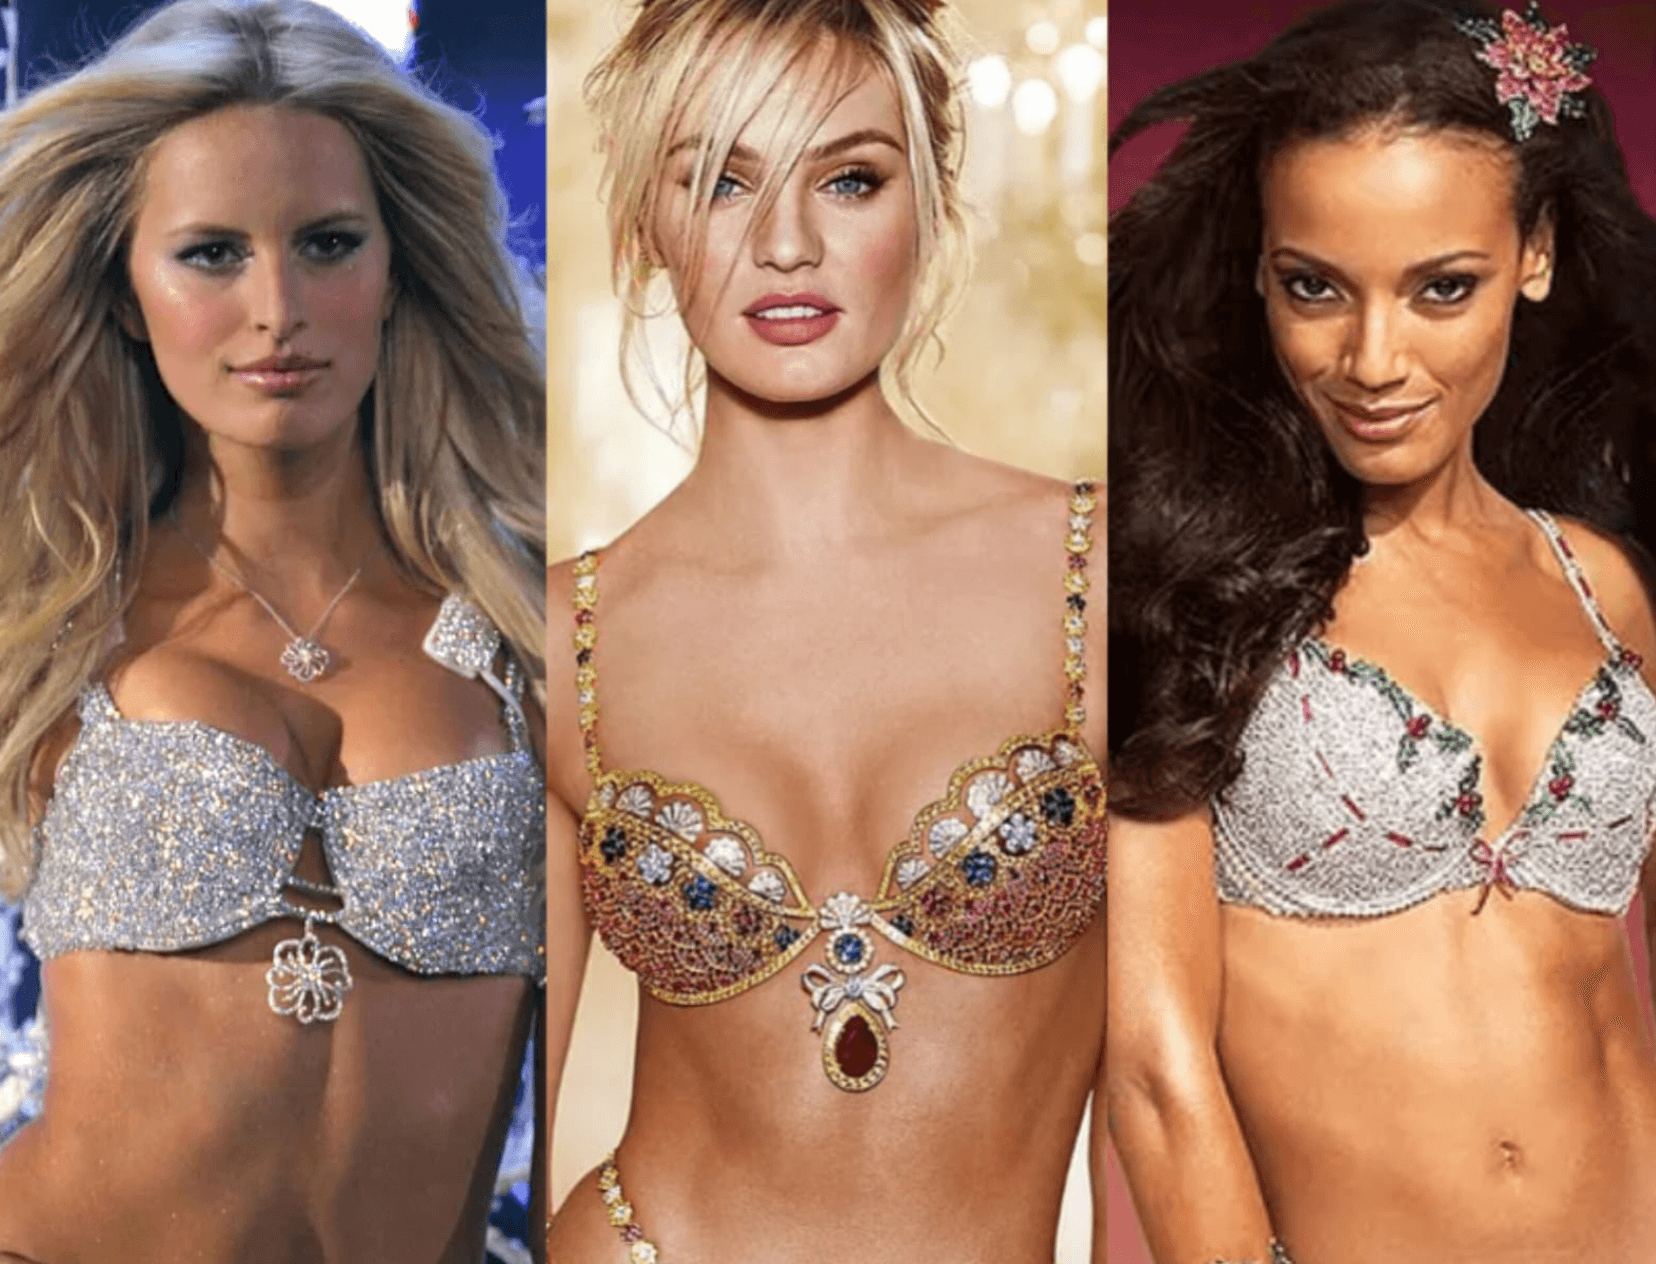 8 Bikinis Made Of Precious Stones That Cost Over A Million Dollars!